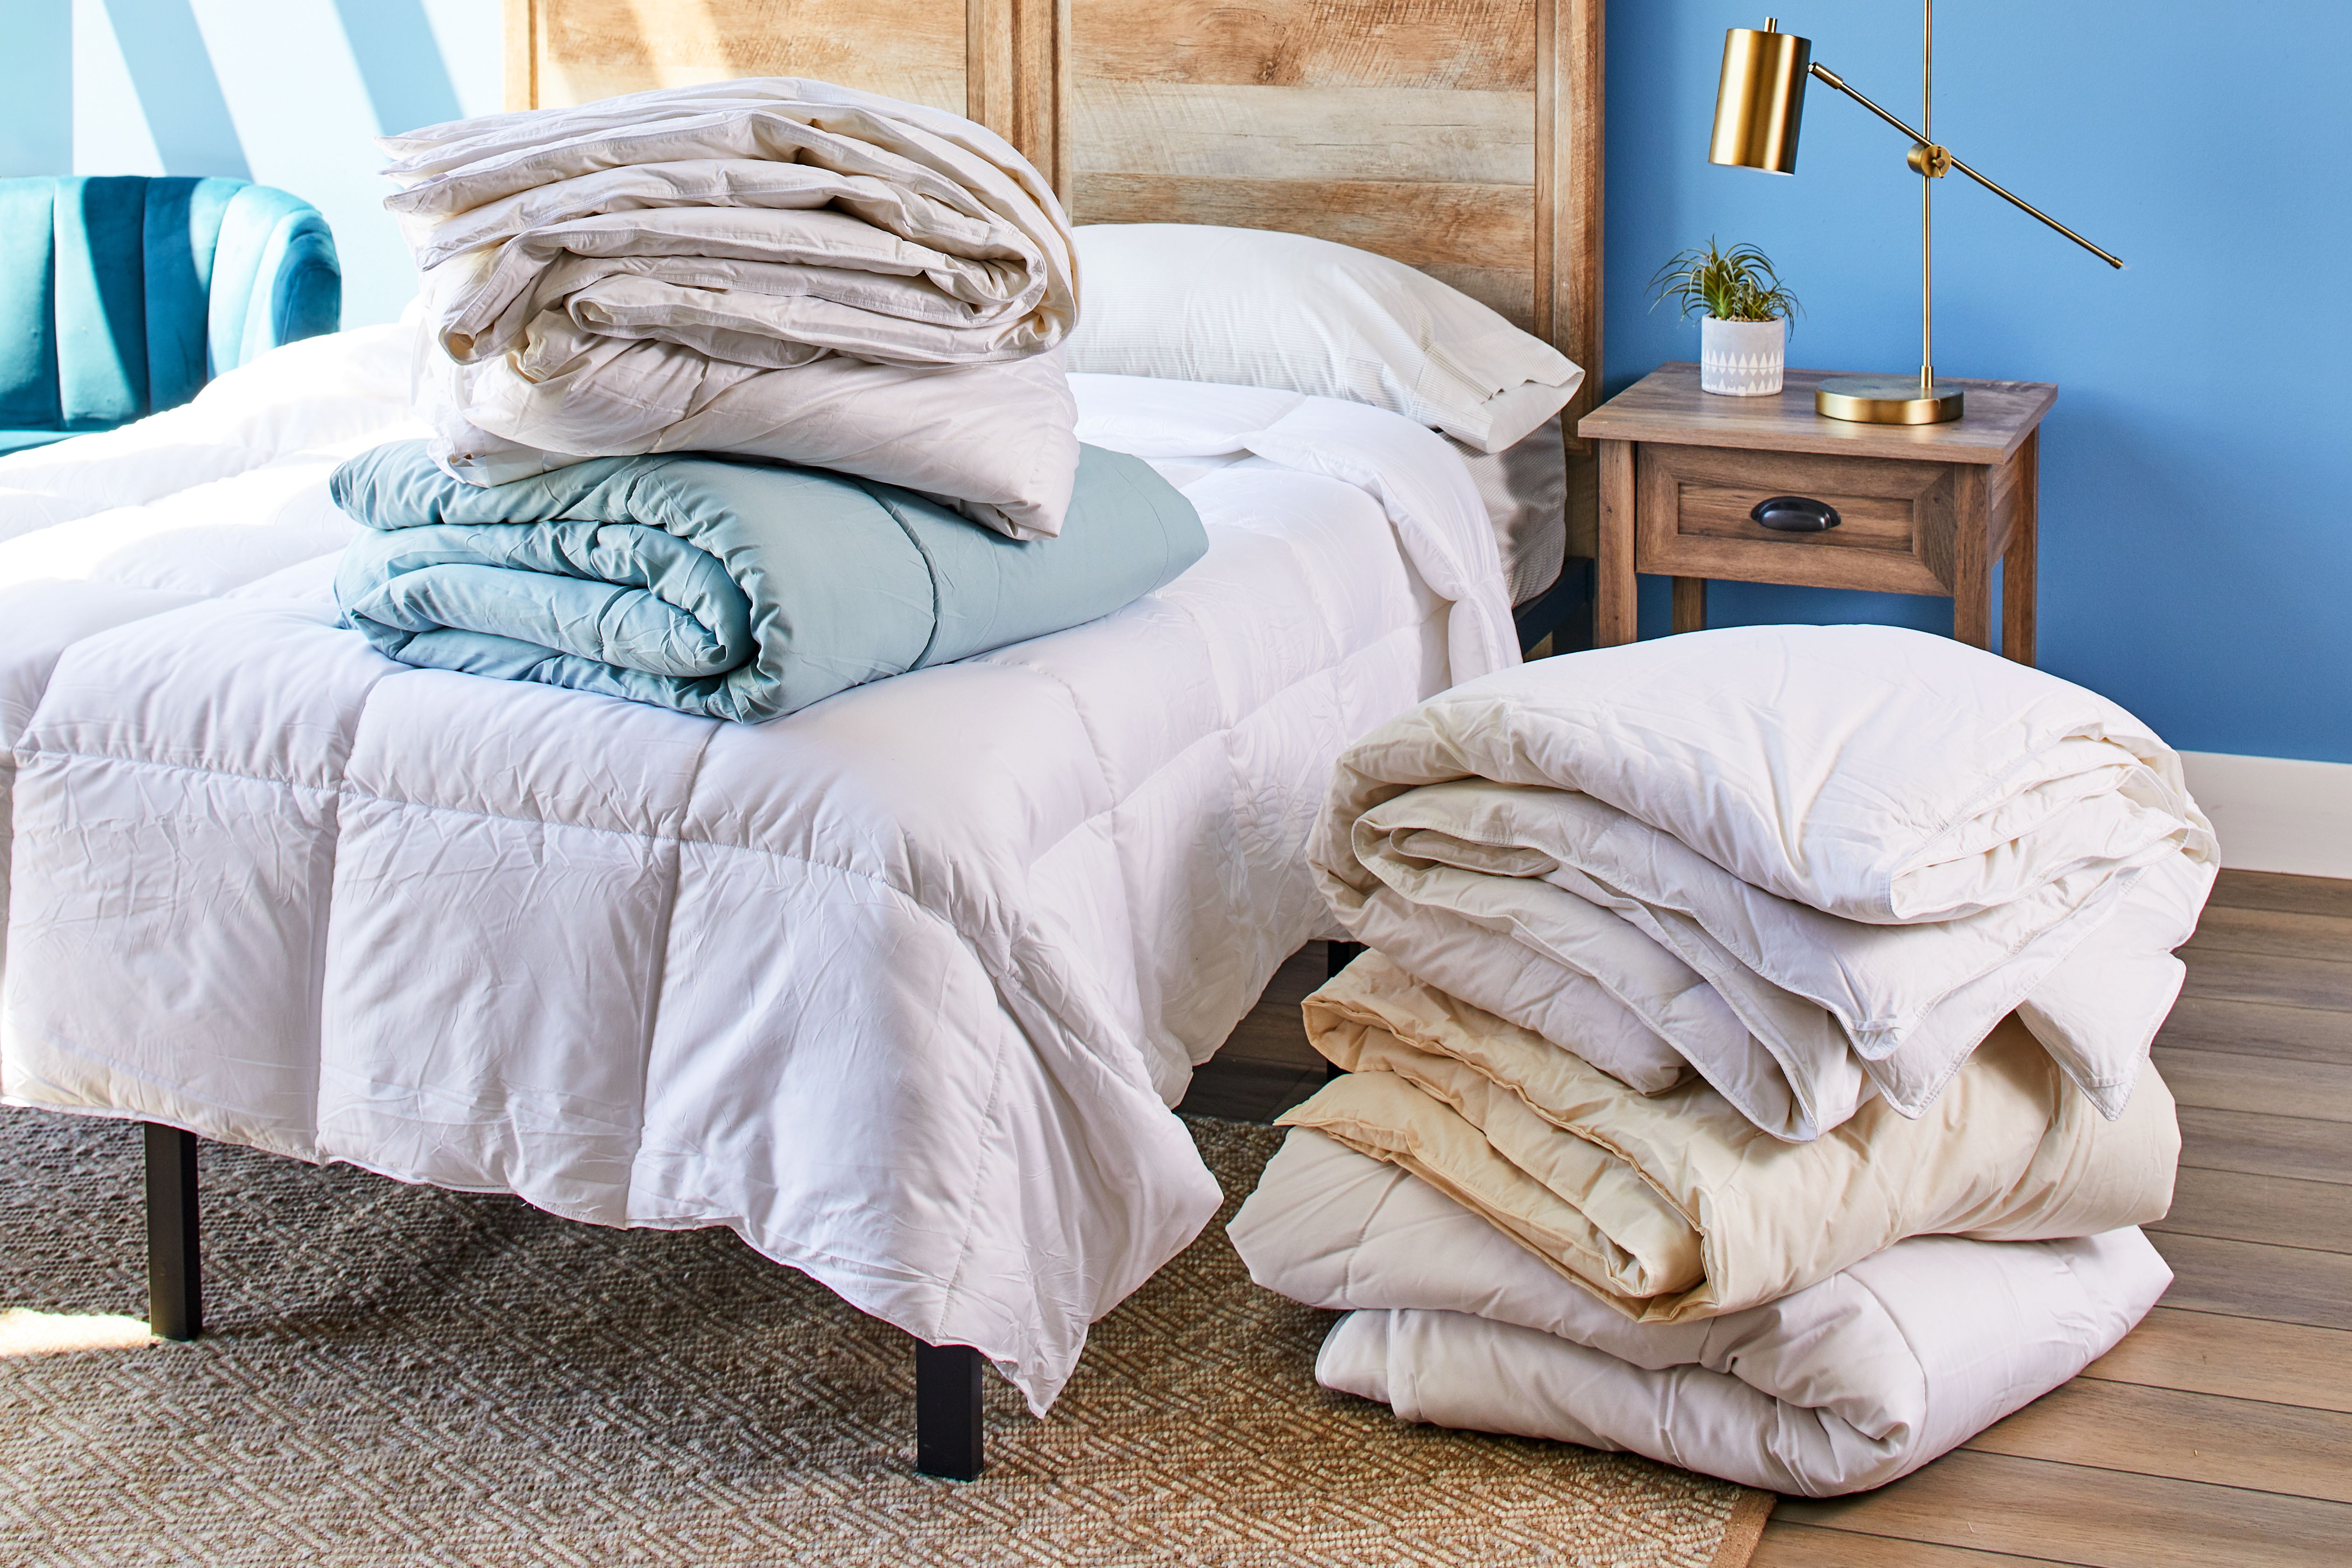 How to dry a comforter – and retain its fluffiness and warmth